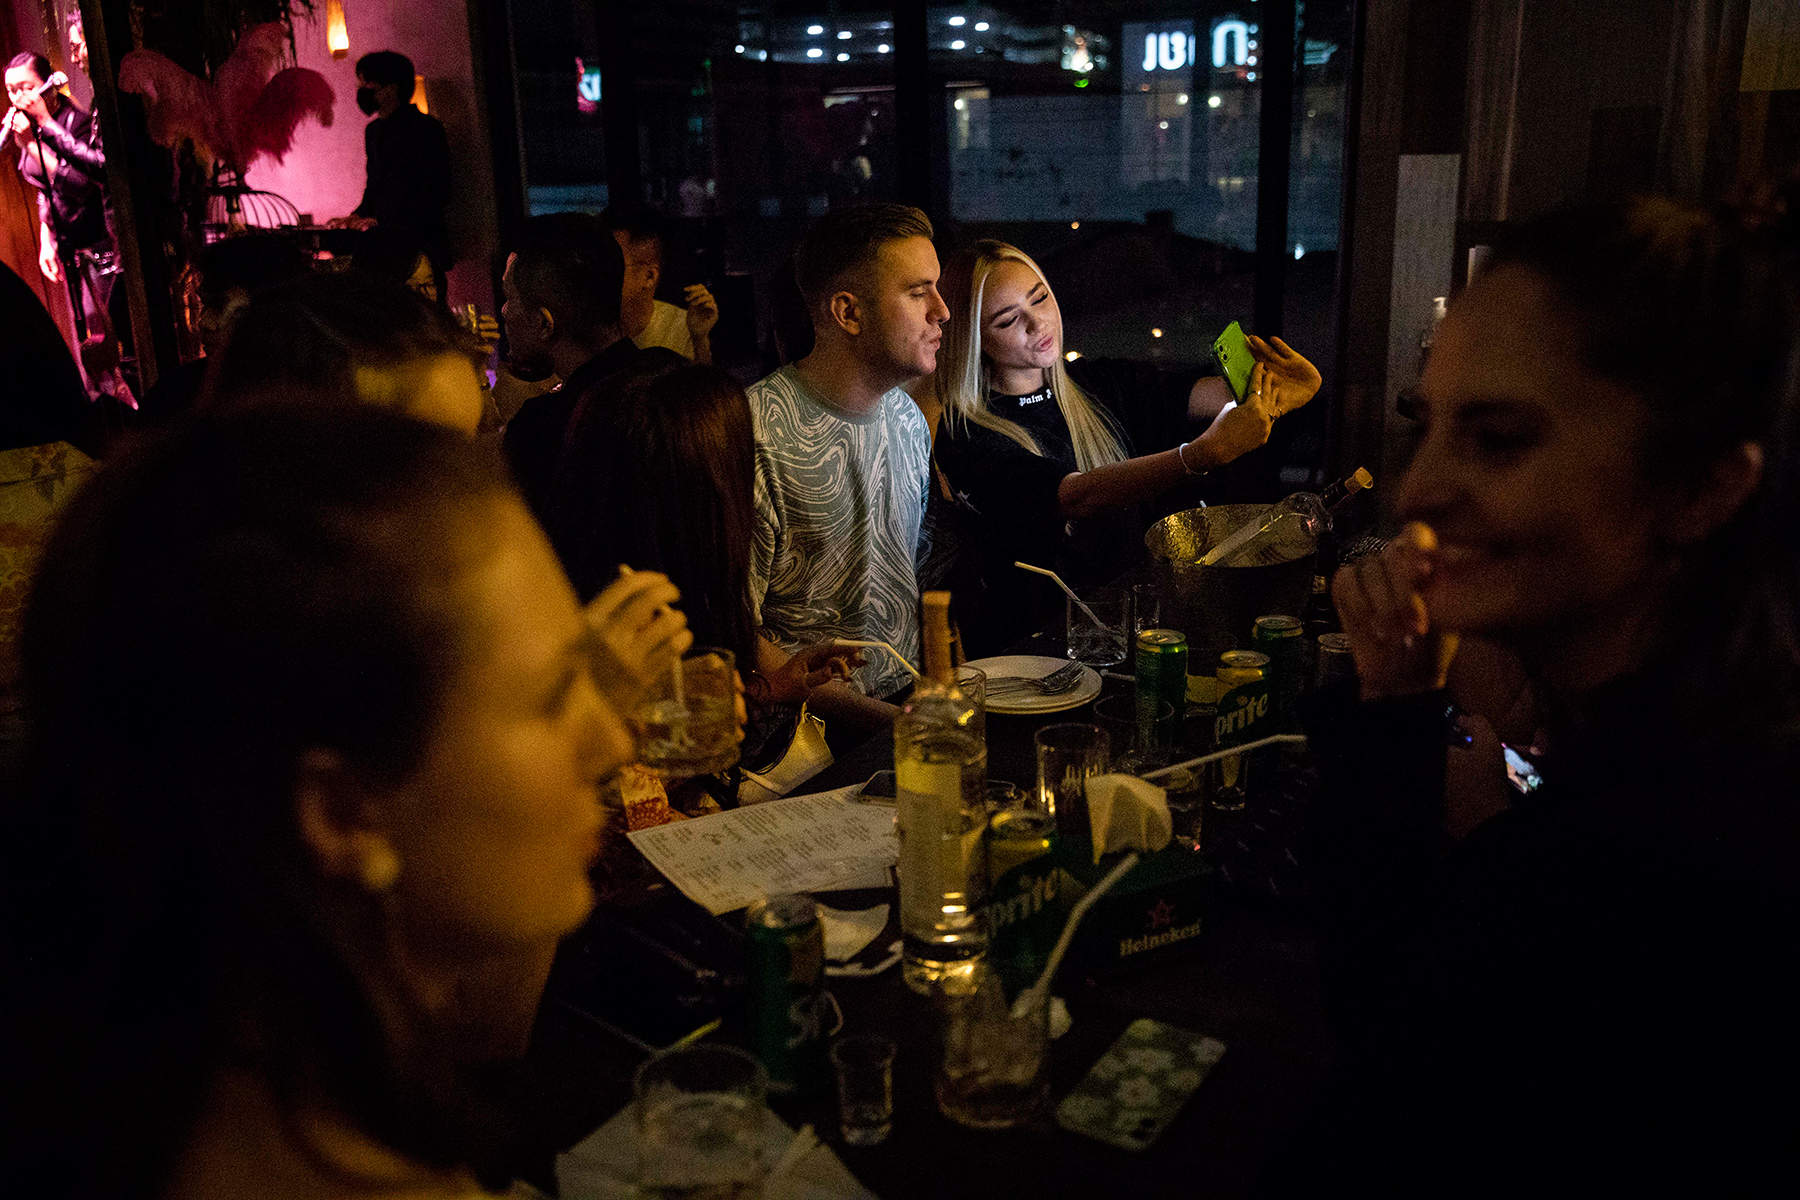 A group of young people in a dark bar